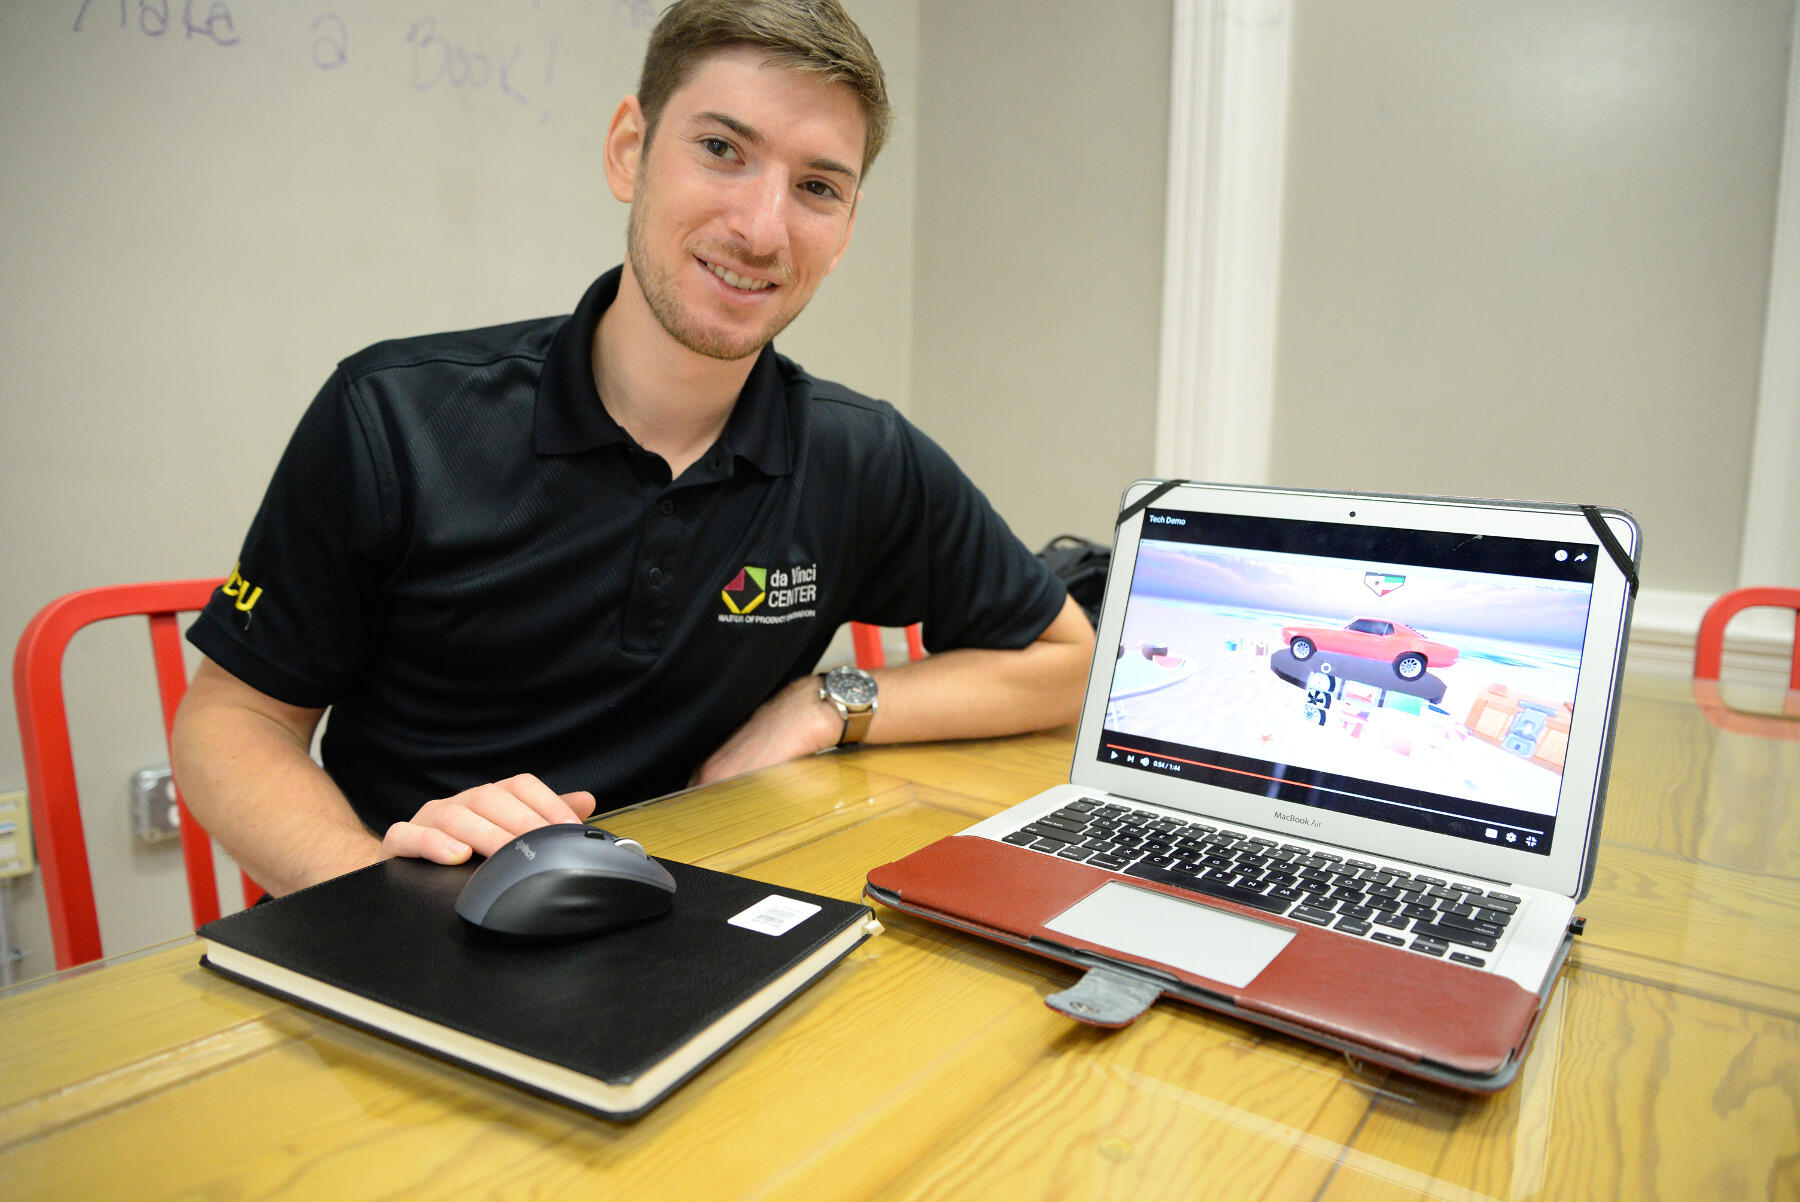 Matthew Halpern, a Master of Product Innovation student in VCU's da Vinci Center, displays his team's prototype virtual reality advertising prototype, which allows virtual reality users to customize a car.
<br>Photo by Brian McNeill, University Public Affairs